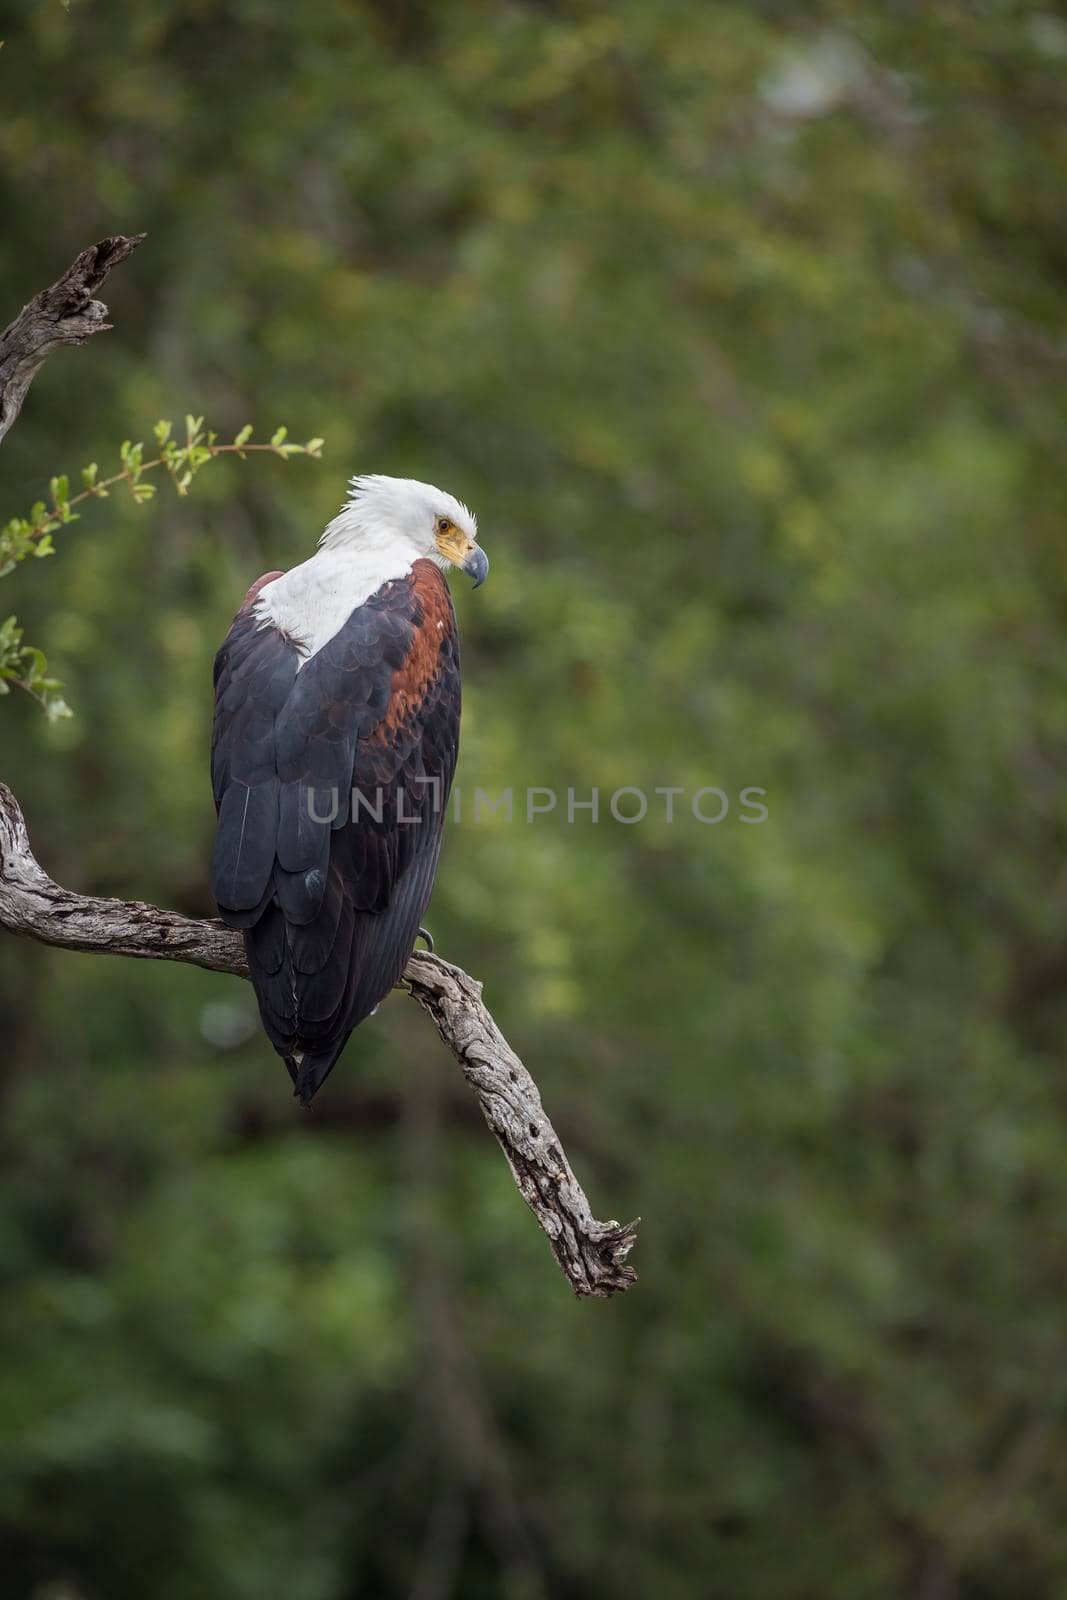 African fish eagle standing in a branch with natural background in Kruger National park, South Africa ; Specie Haliaeetus vocifer family of Accipitridae